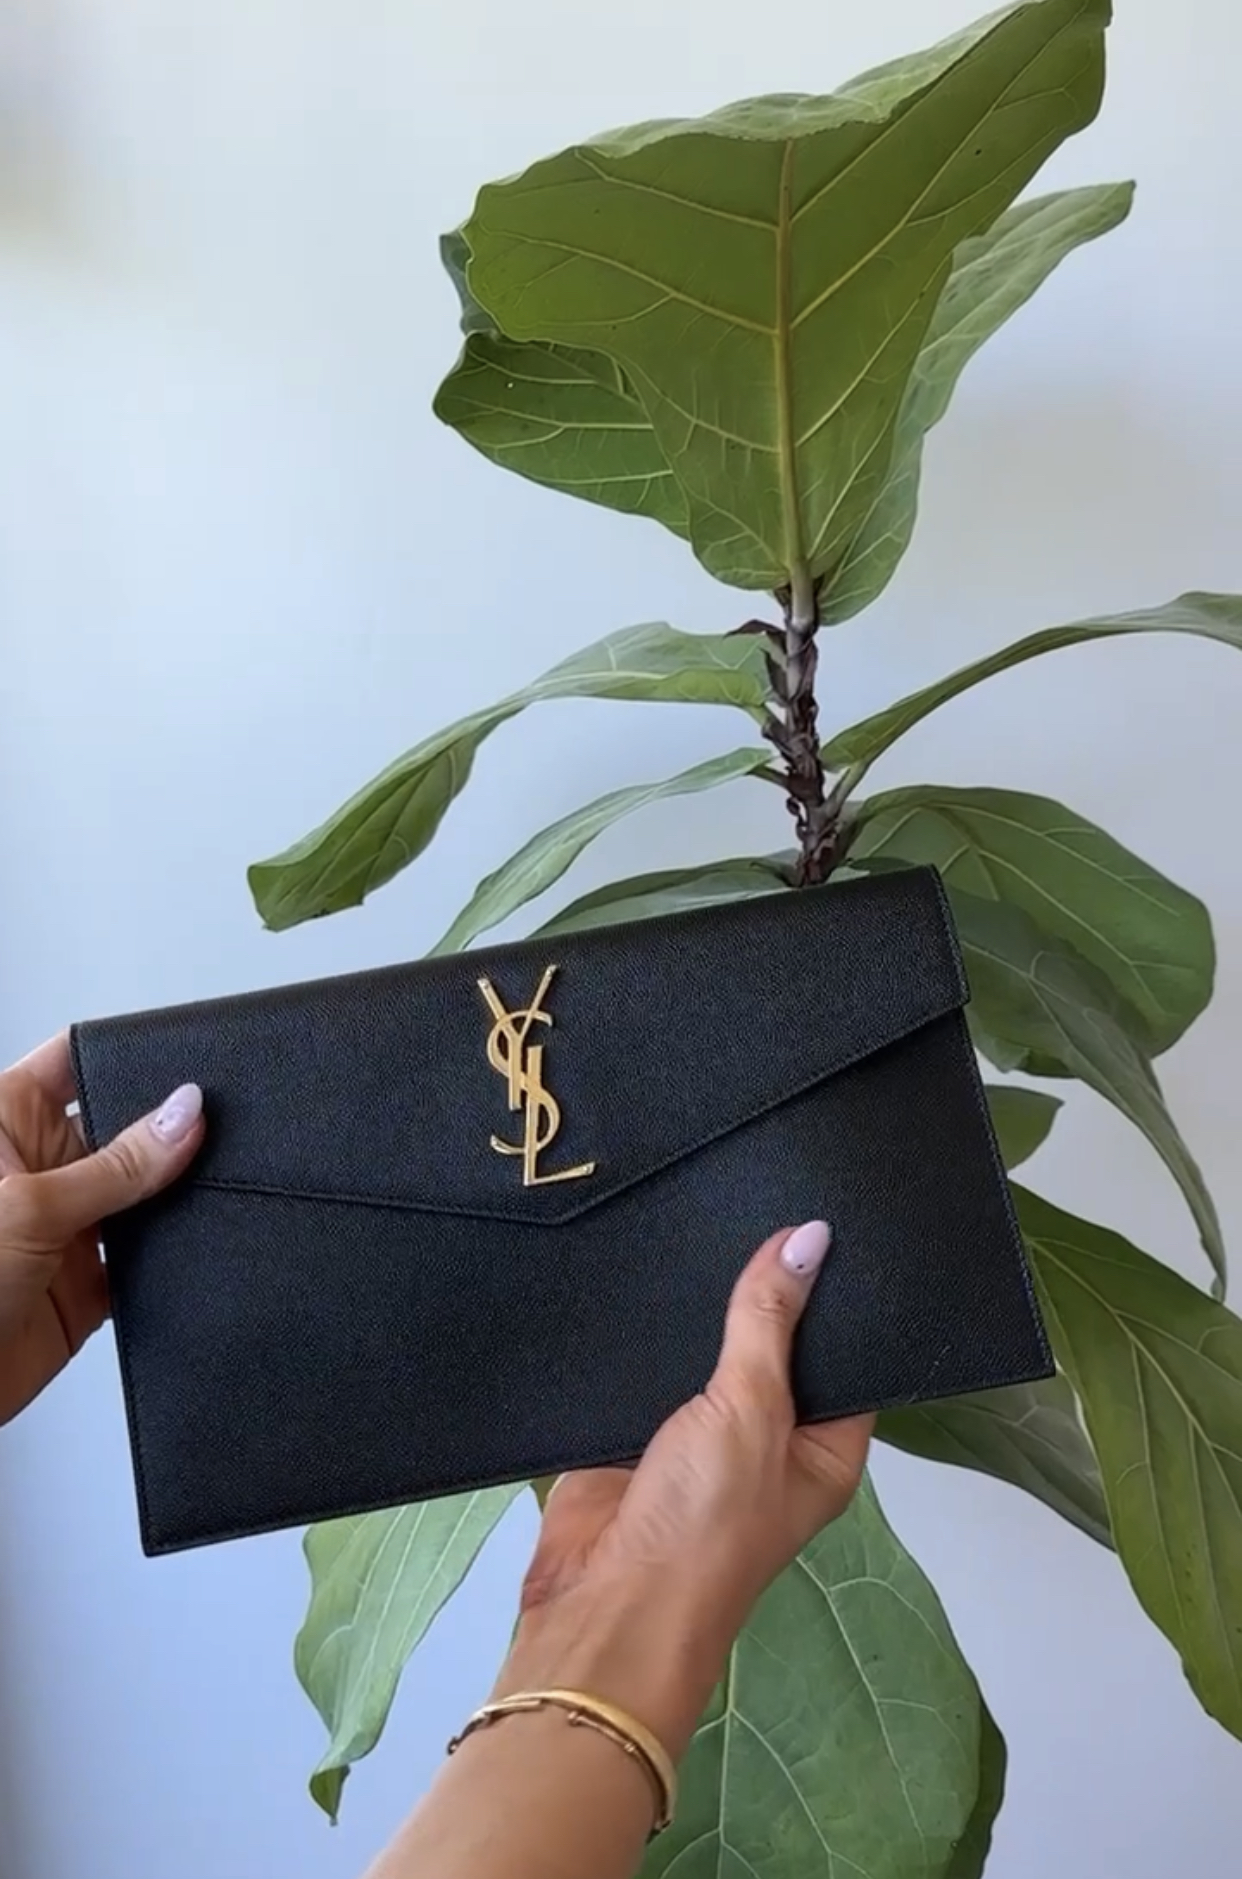 YSL Uptown Pouch for hire.